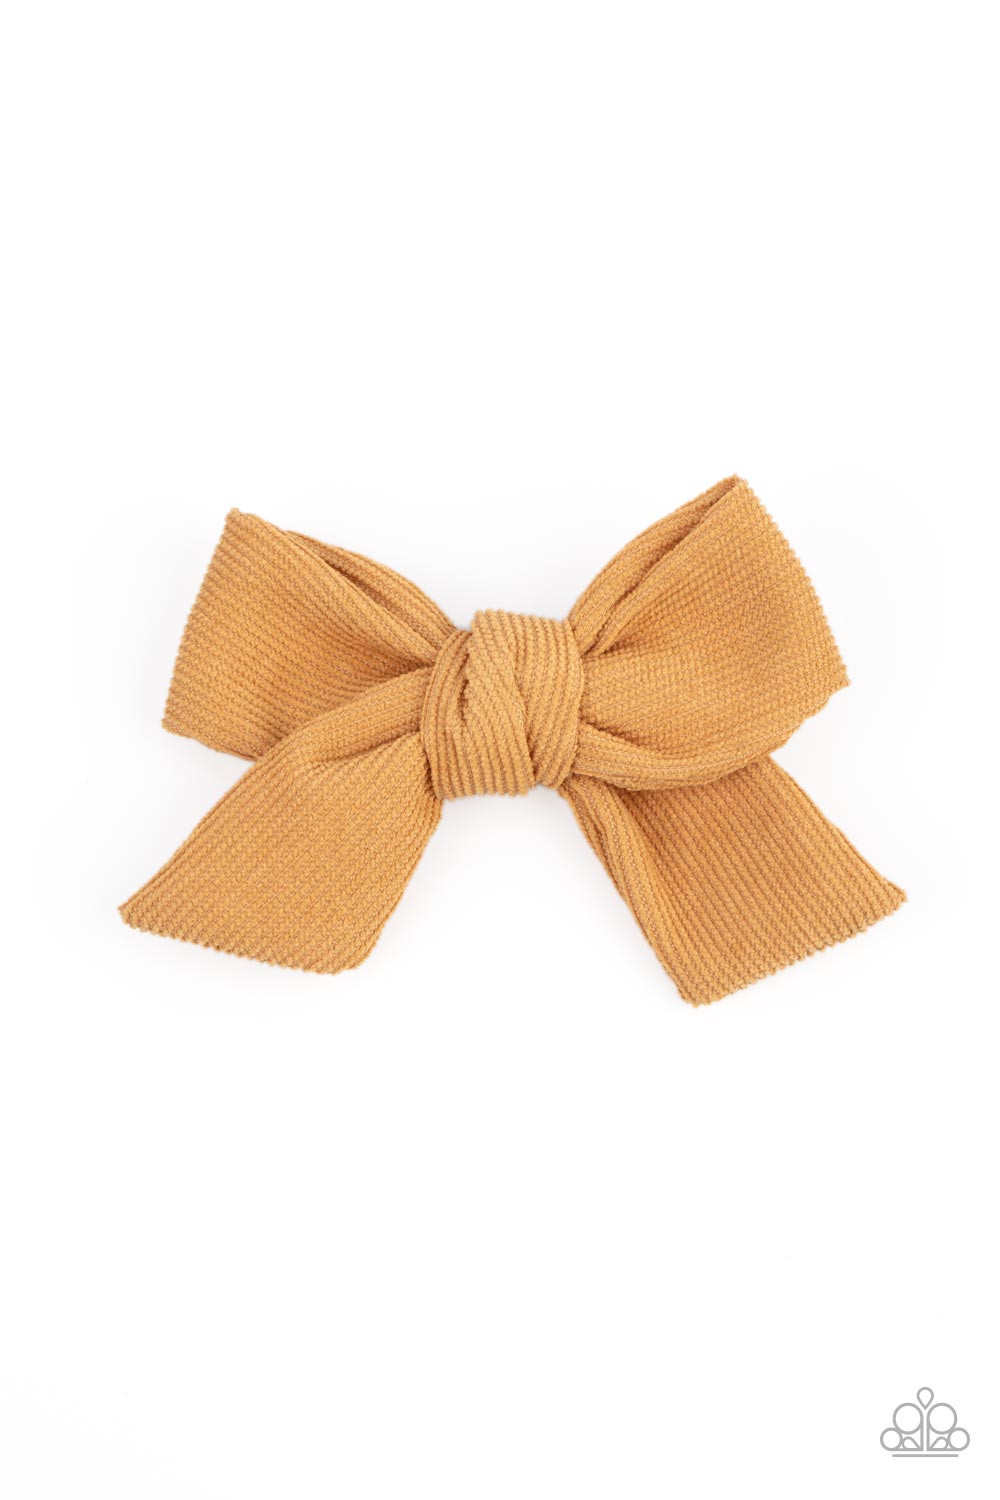 Paparazzi Accessories: Corduroy Cowgirl - Yellow Hair Clip